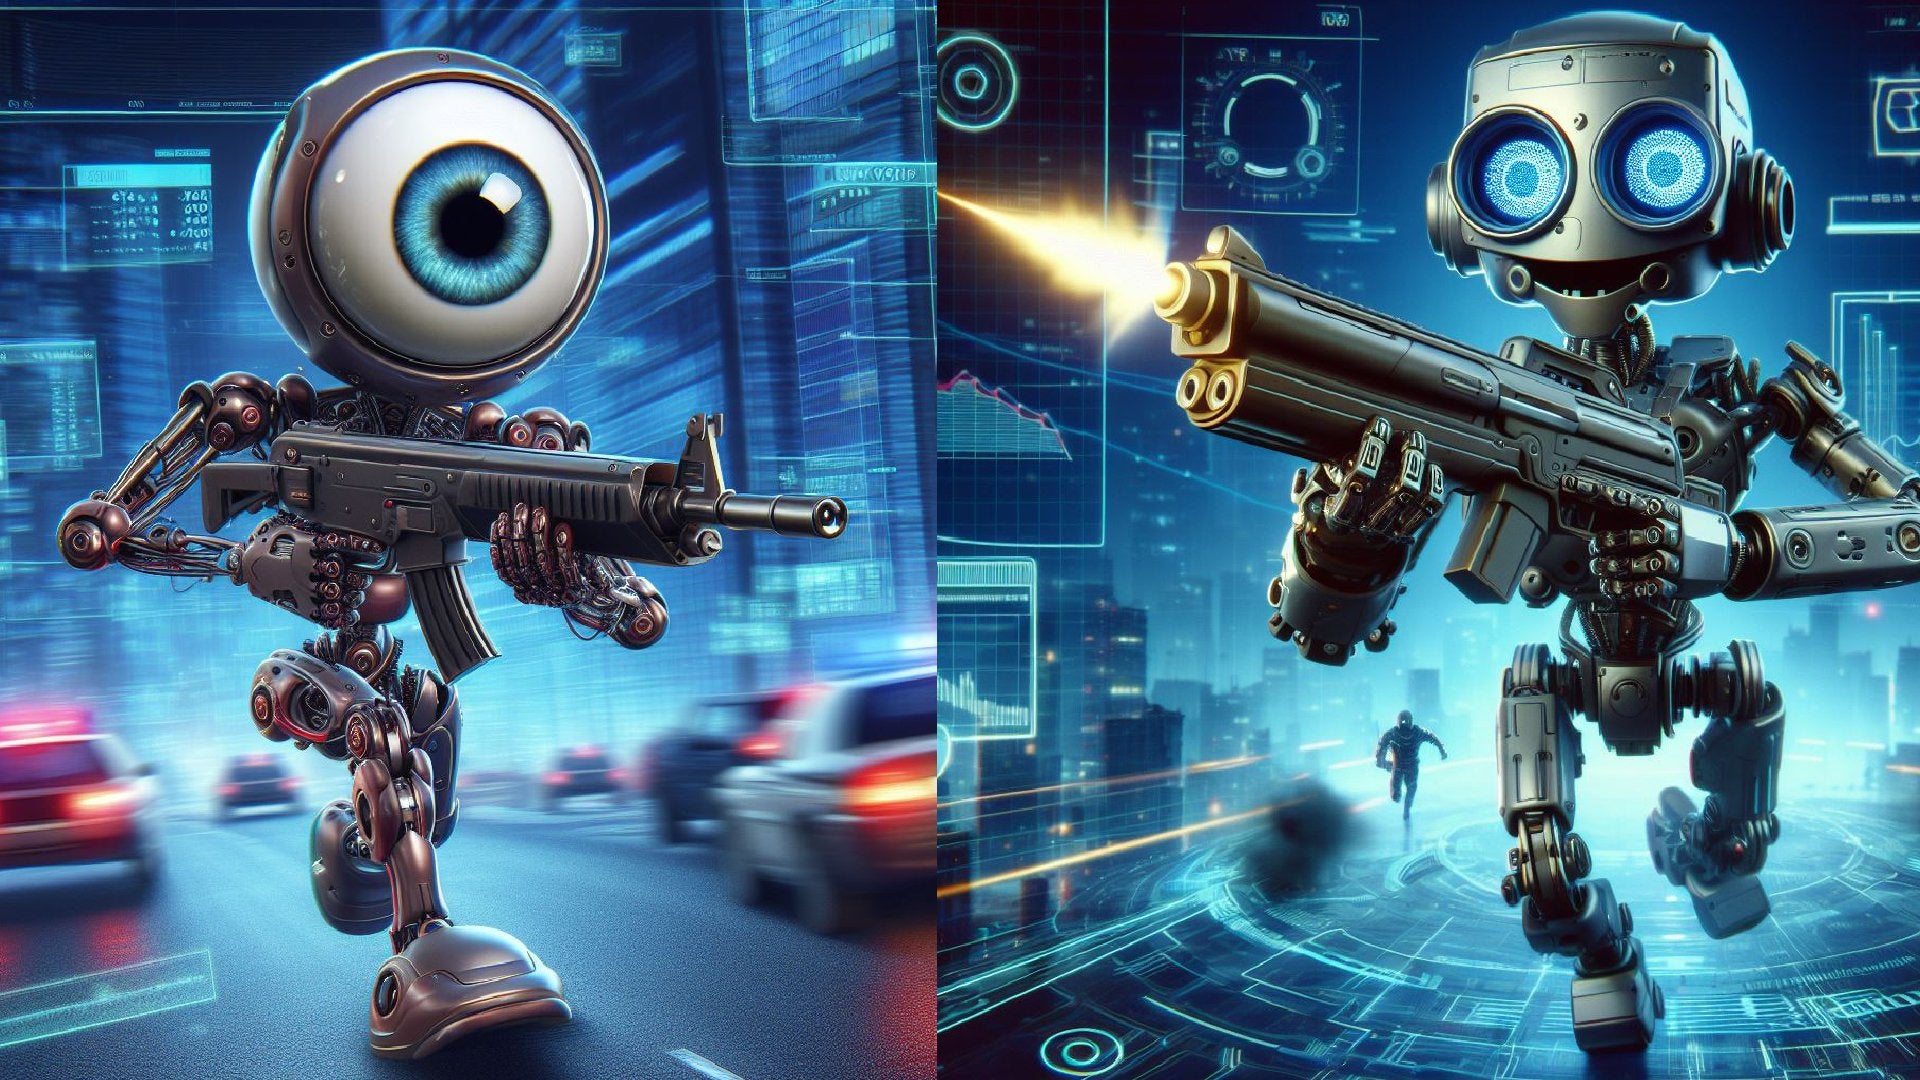 Two robots with large eyes running at each other while holding guns.